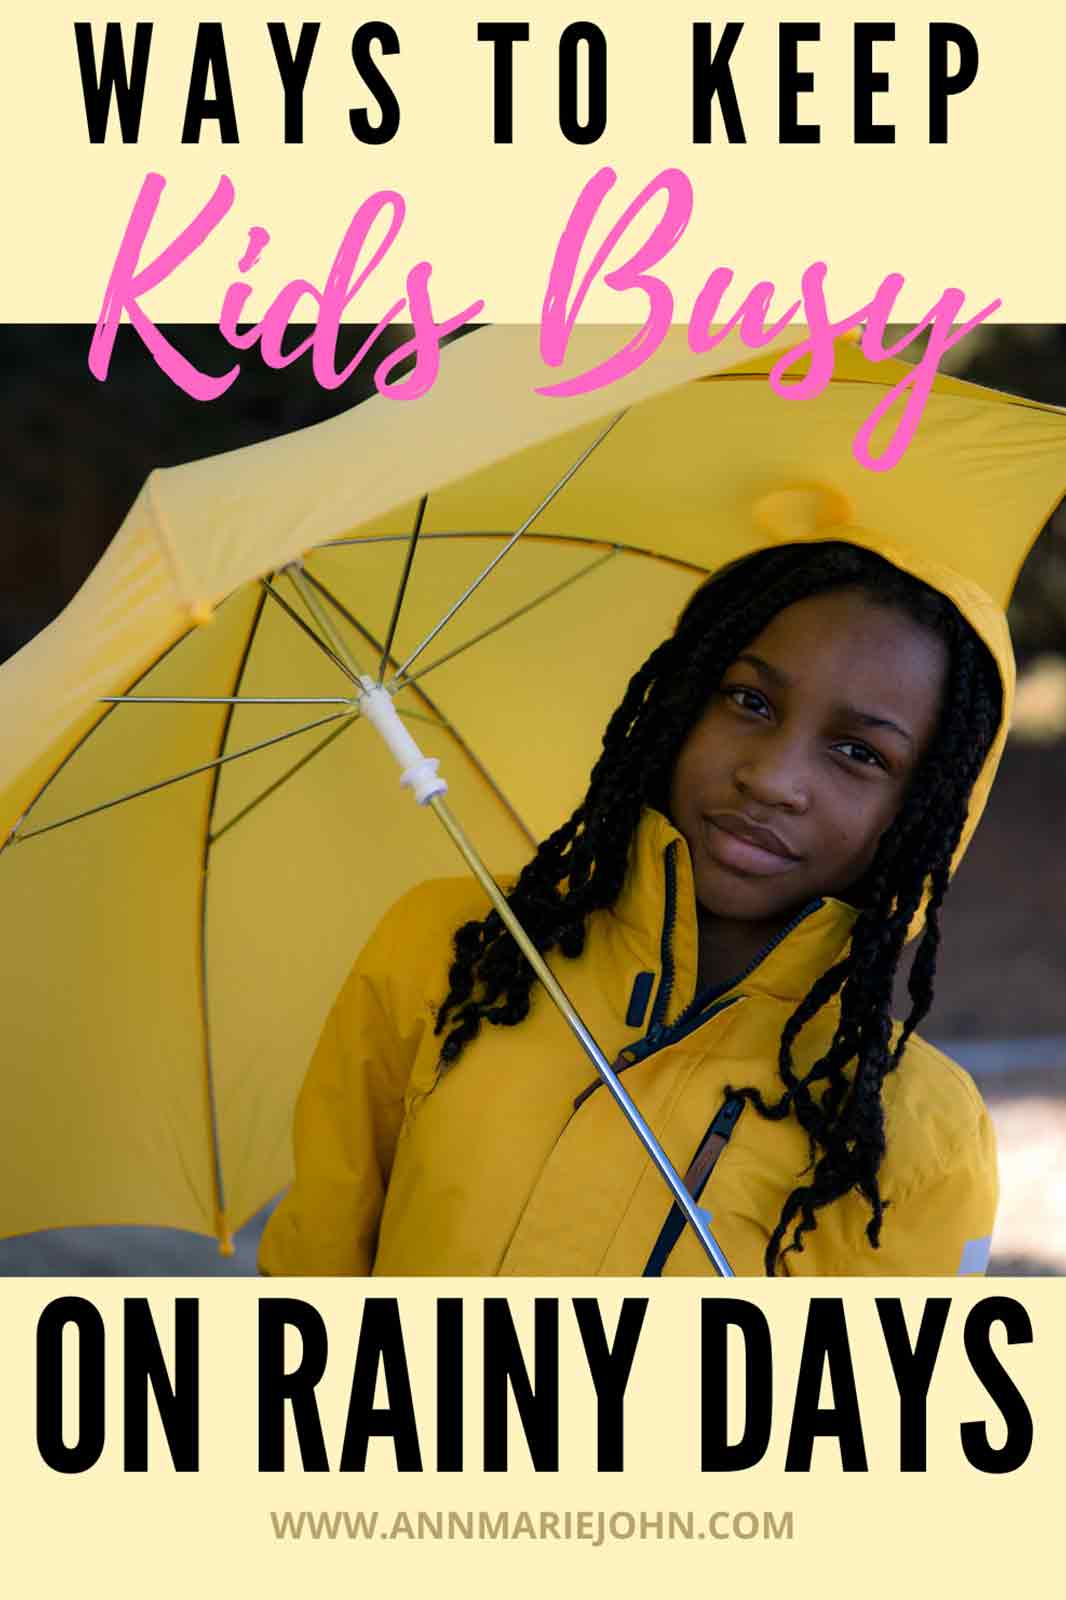 Ways to Keep Kids Busy During Rainy Days